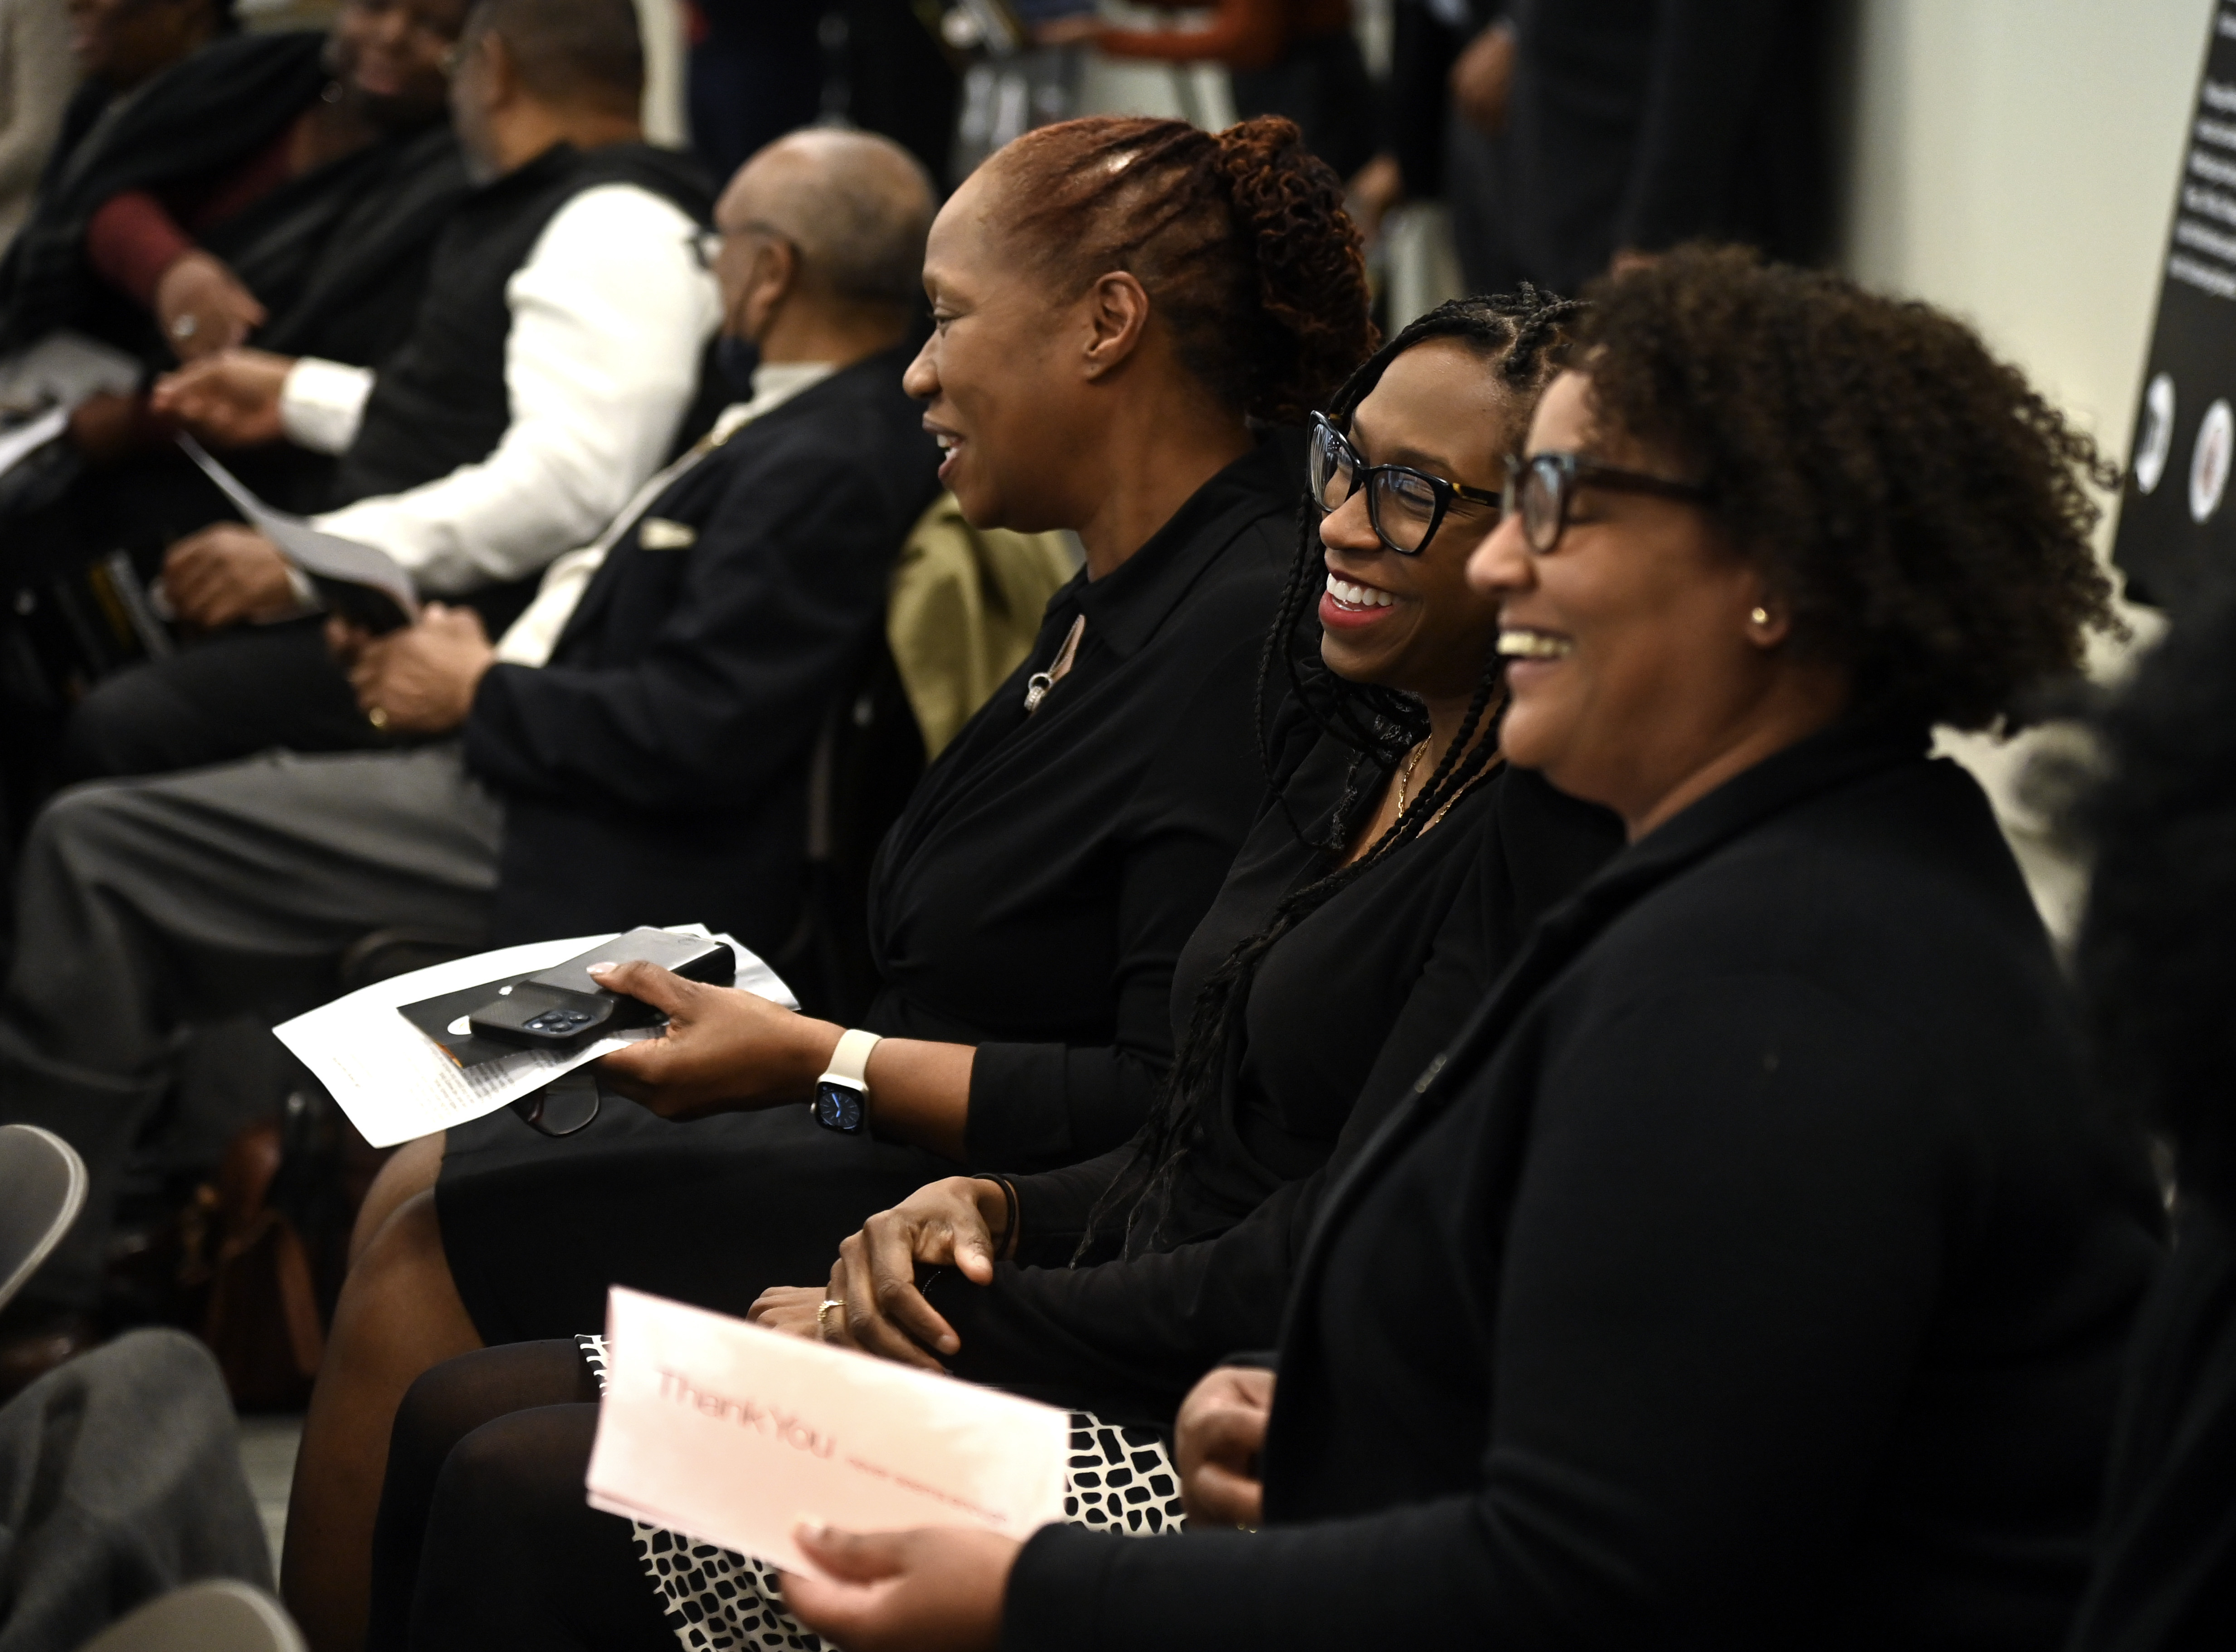 MTA Employees Attend Black History Month Event